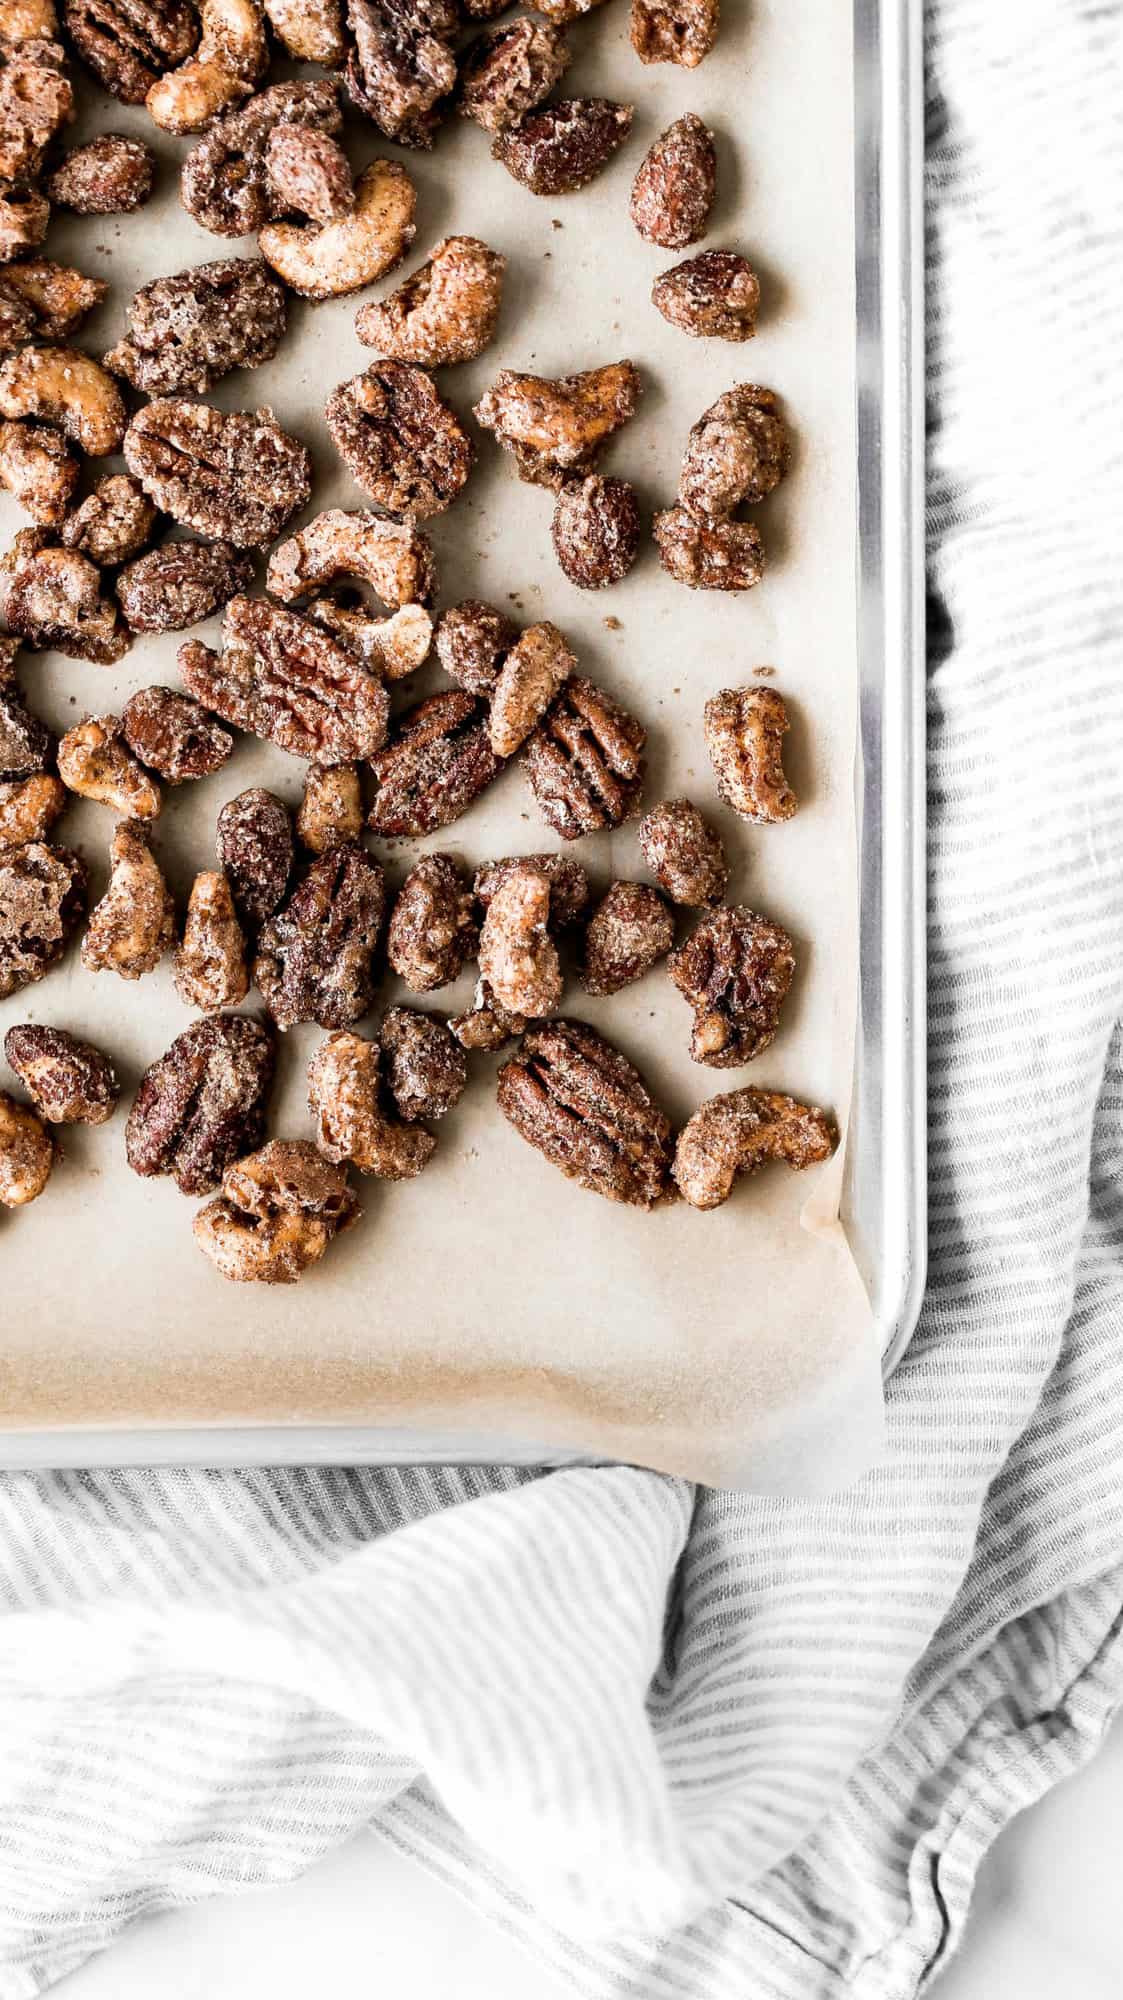 a baking tray of candied nuts